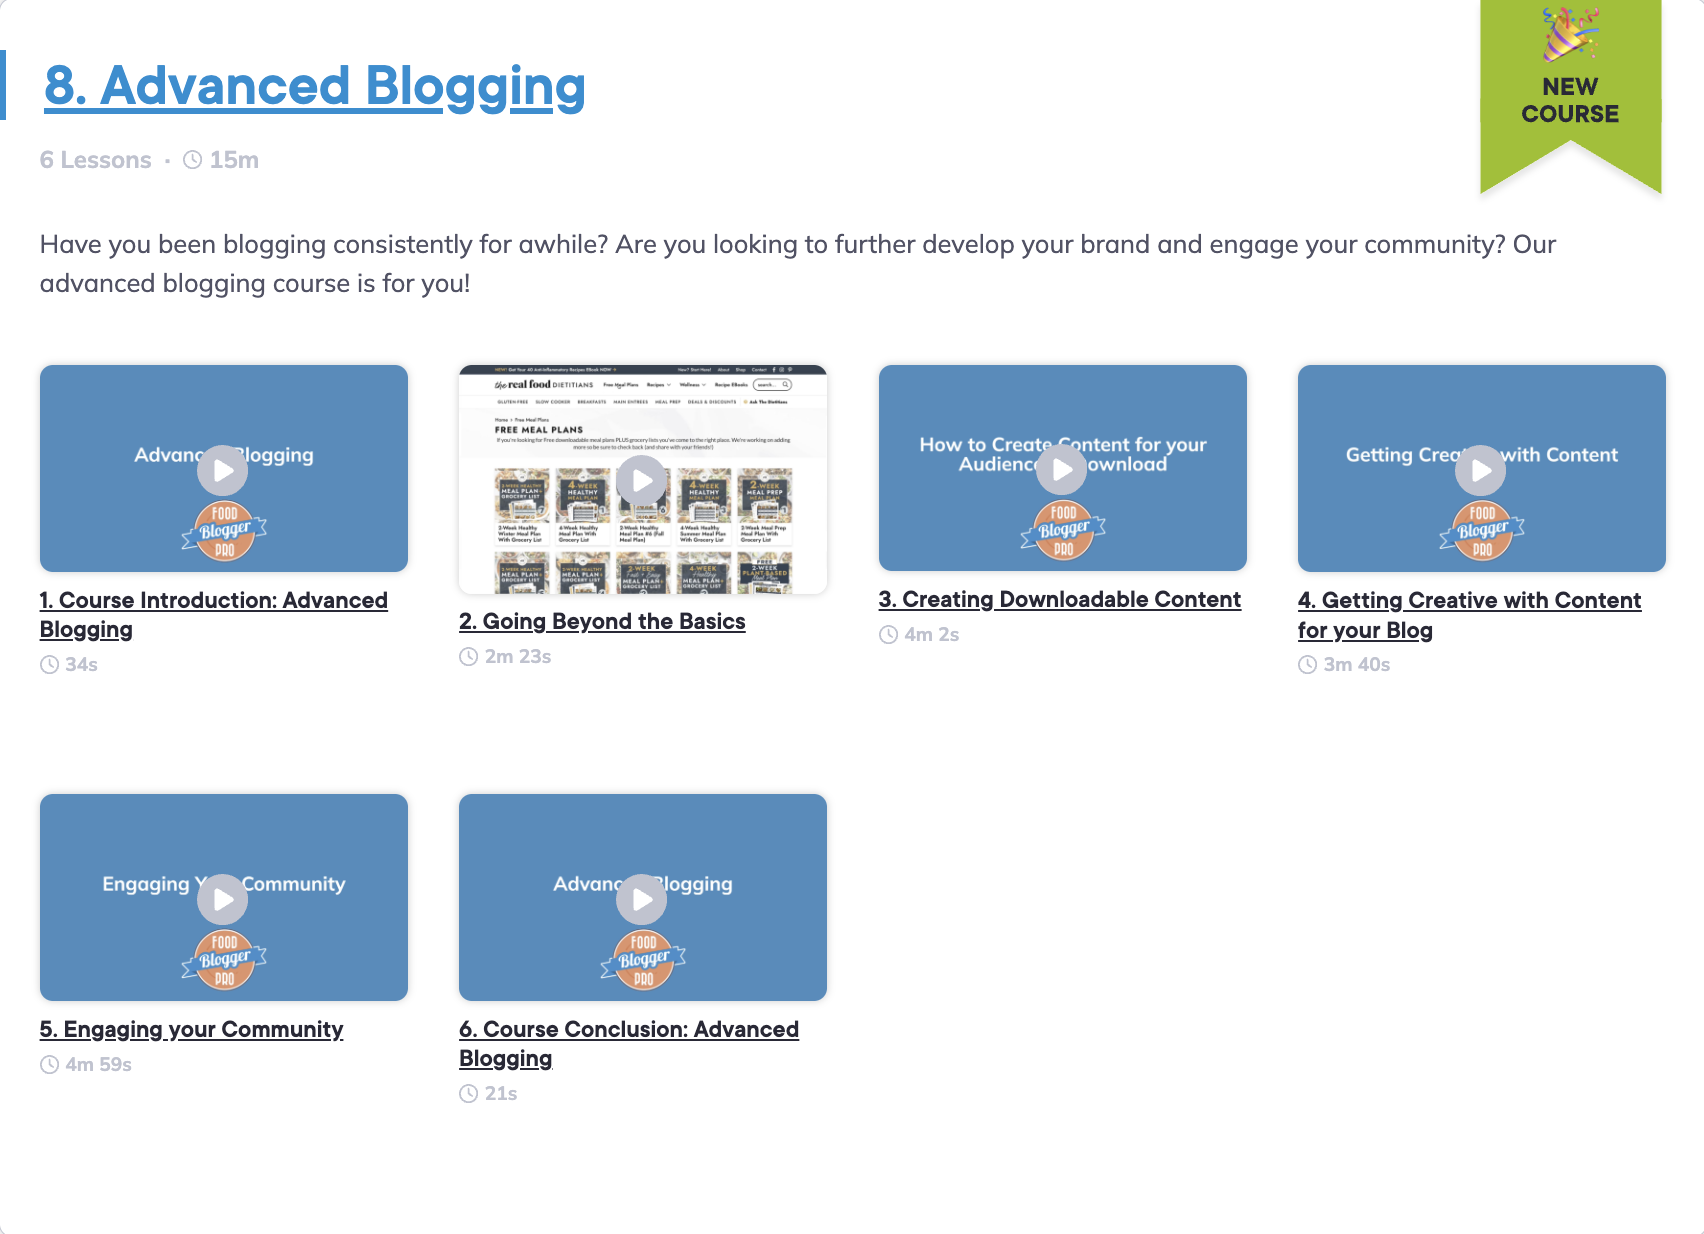 Overview of Advanced Blogging Course